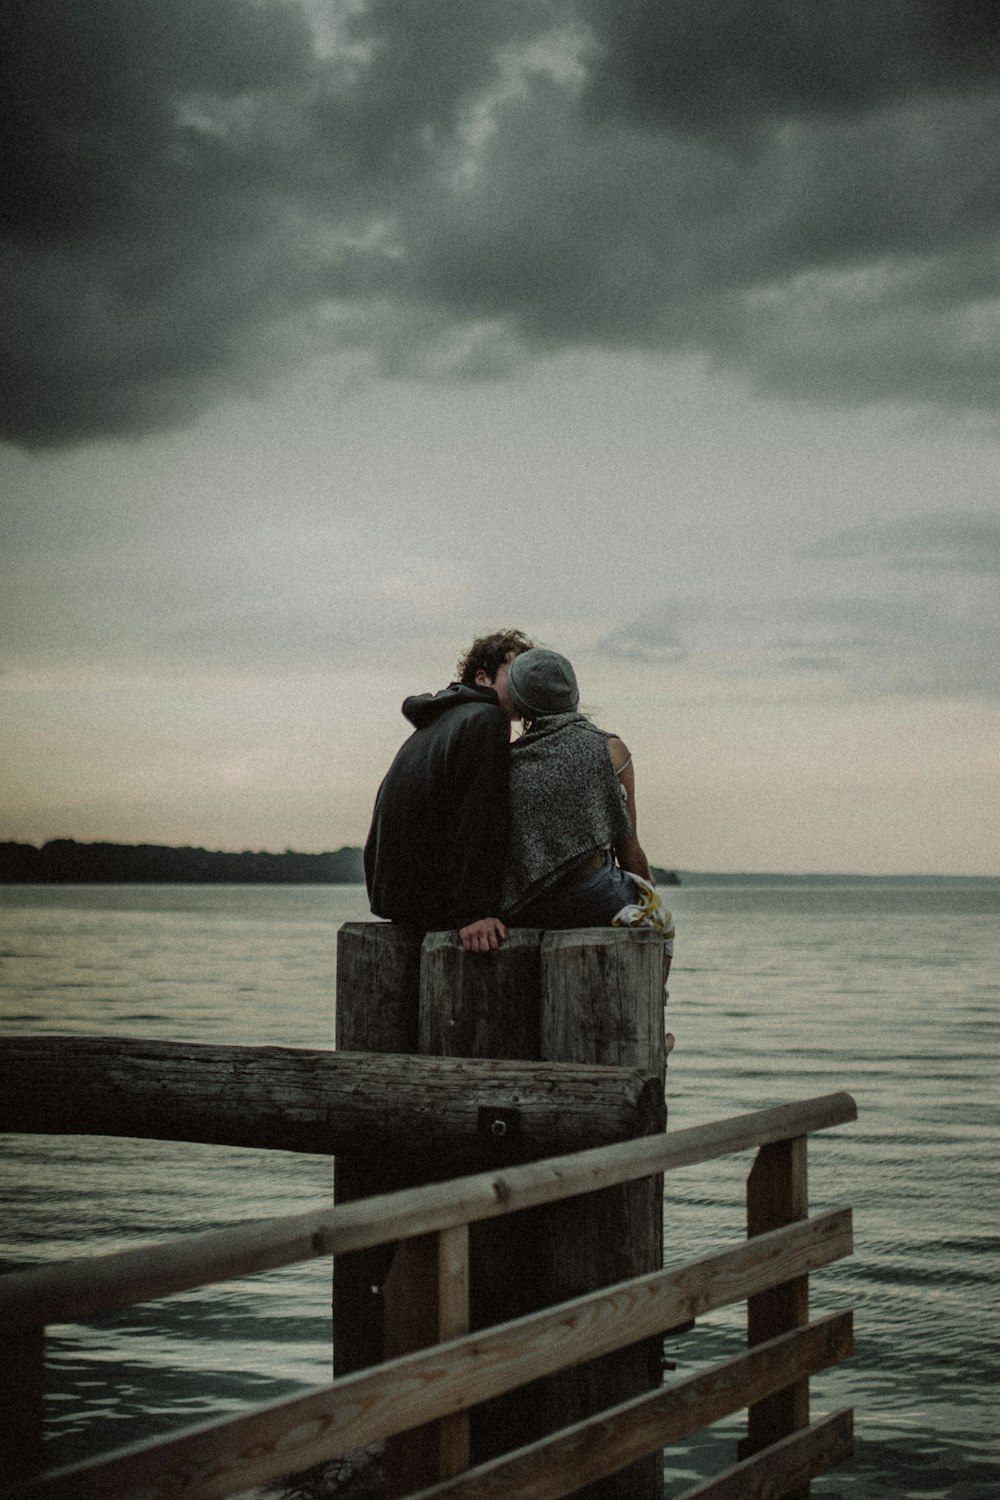 man and woman sitting and kissing on post near the body of water